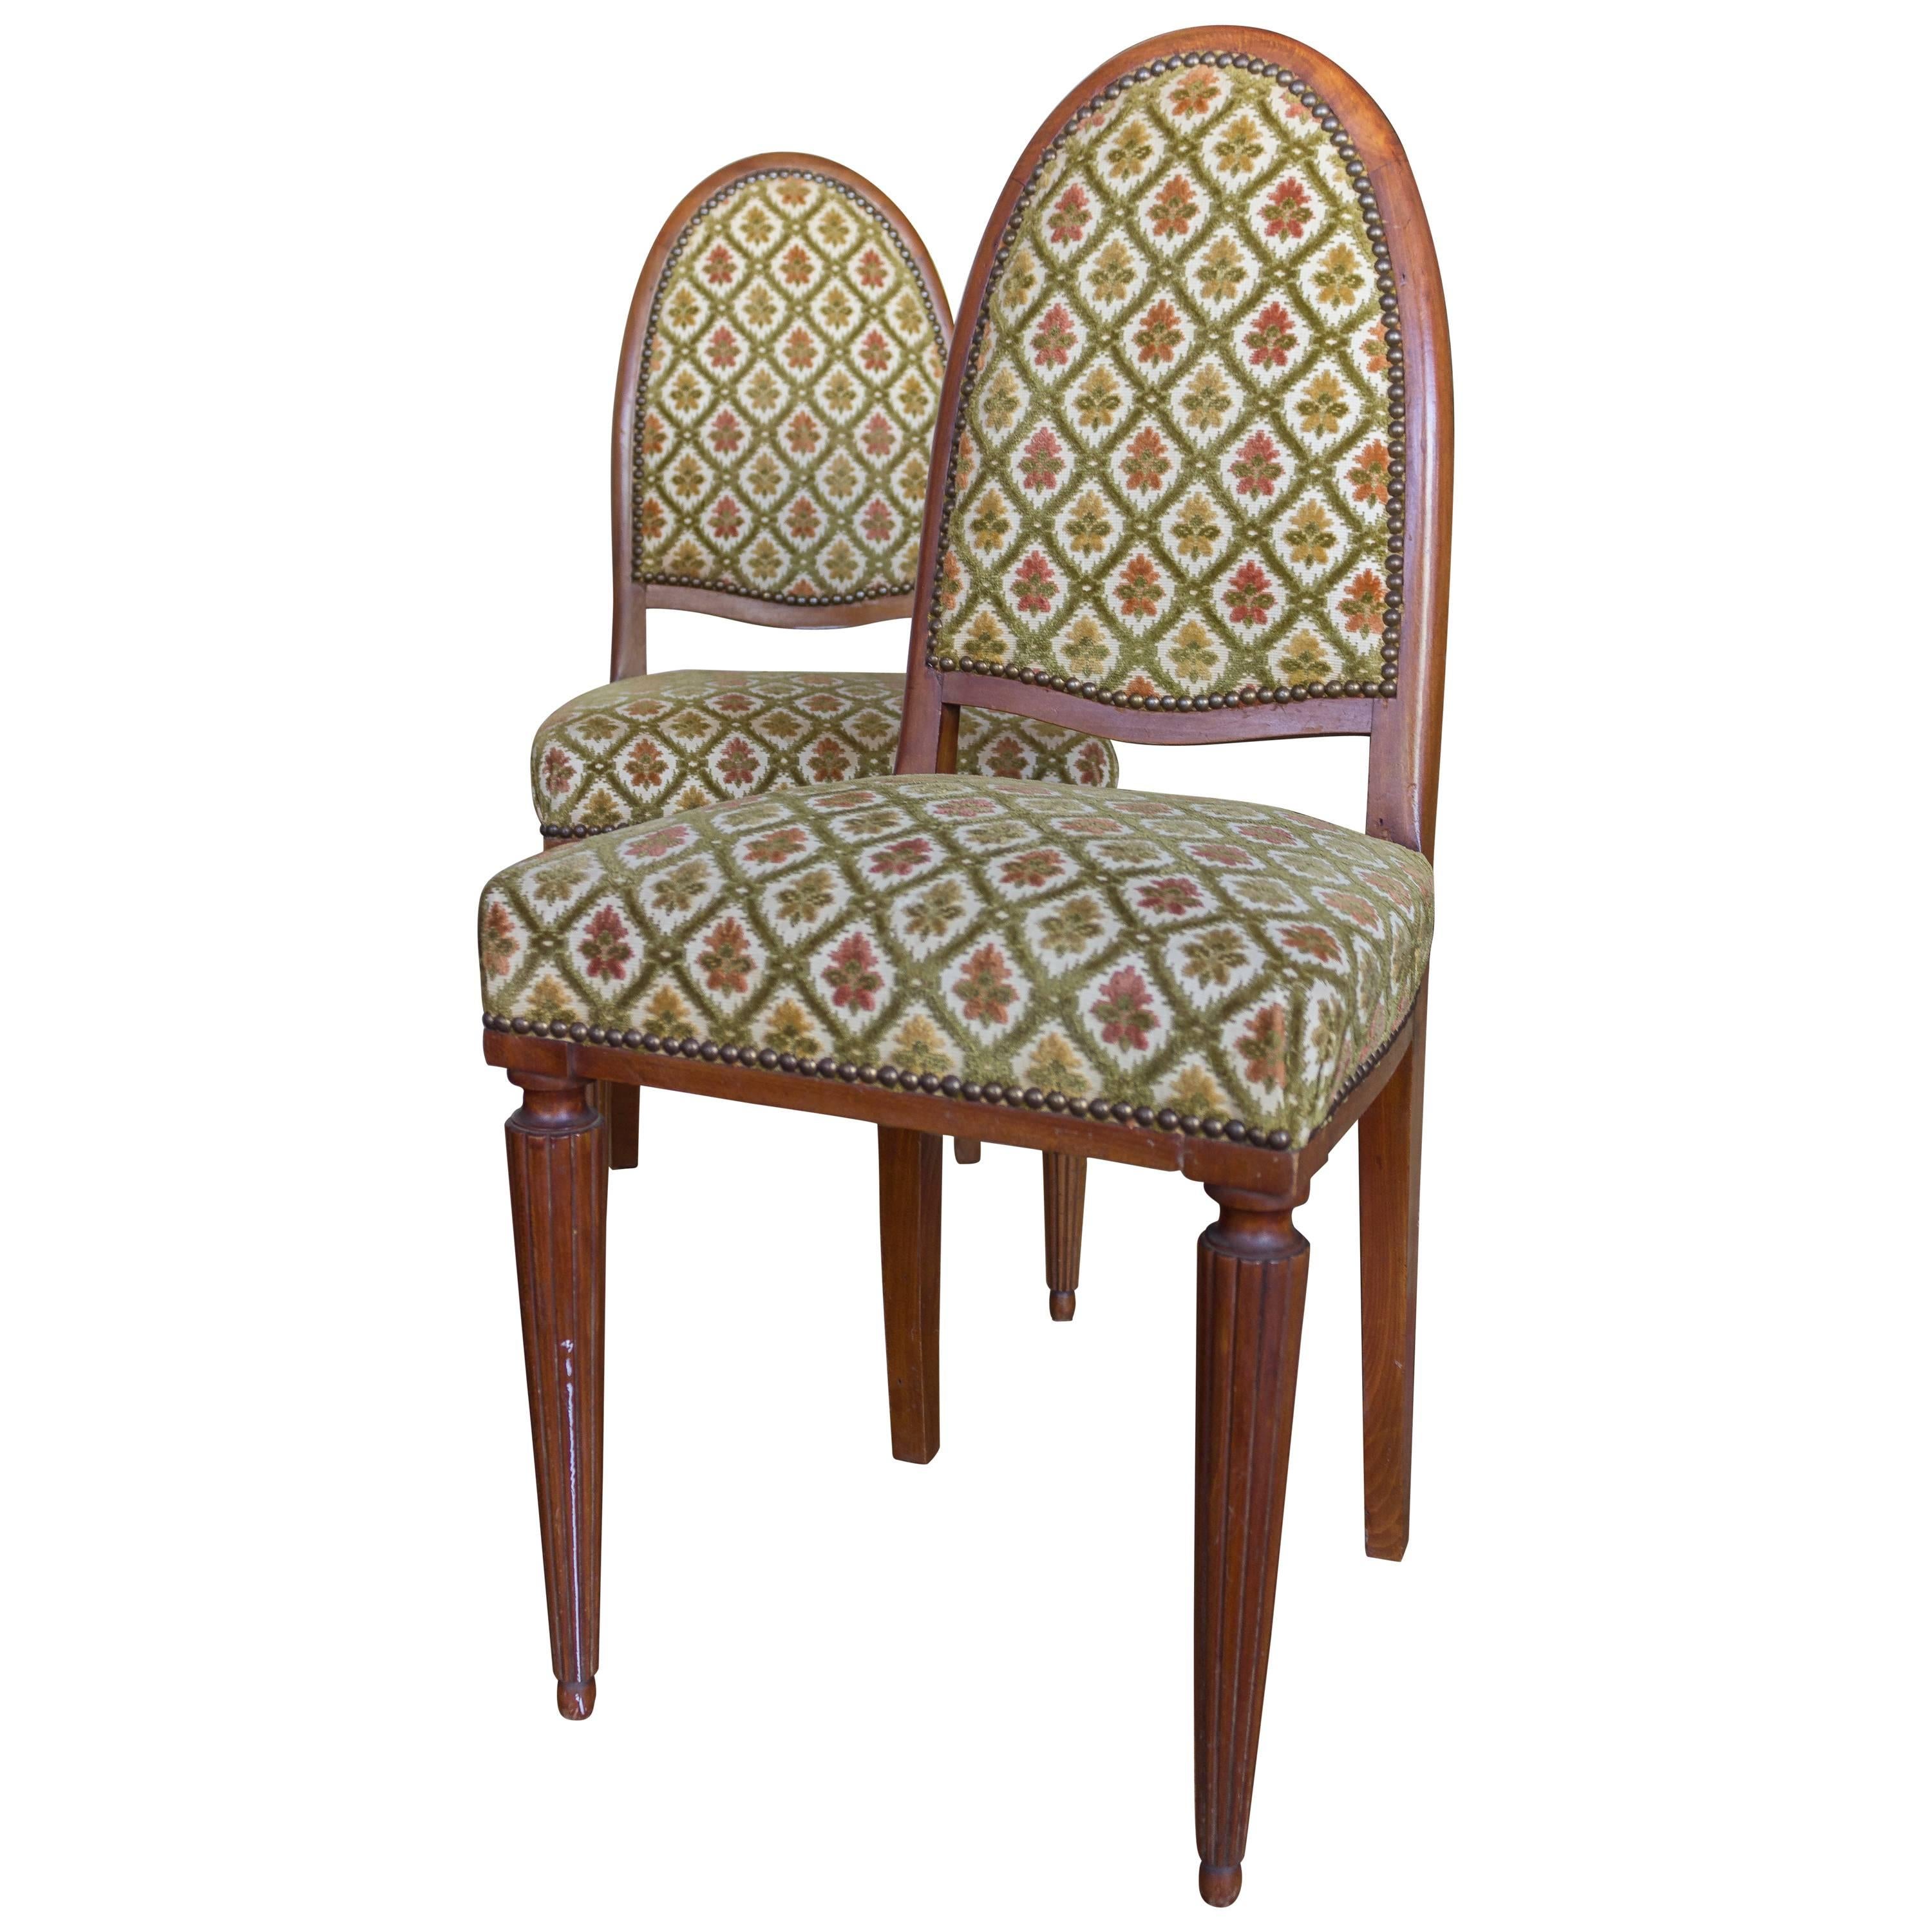 Pair of French Art Deco Side Chairs with Fluted Legs